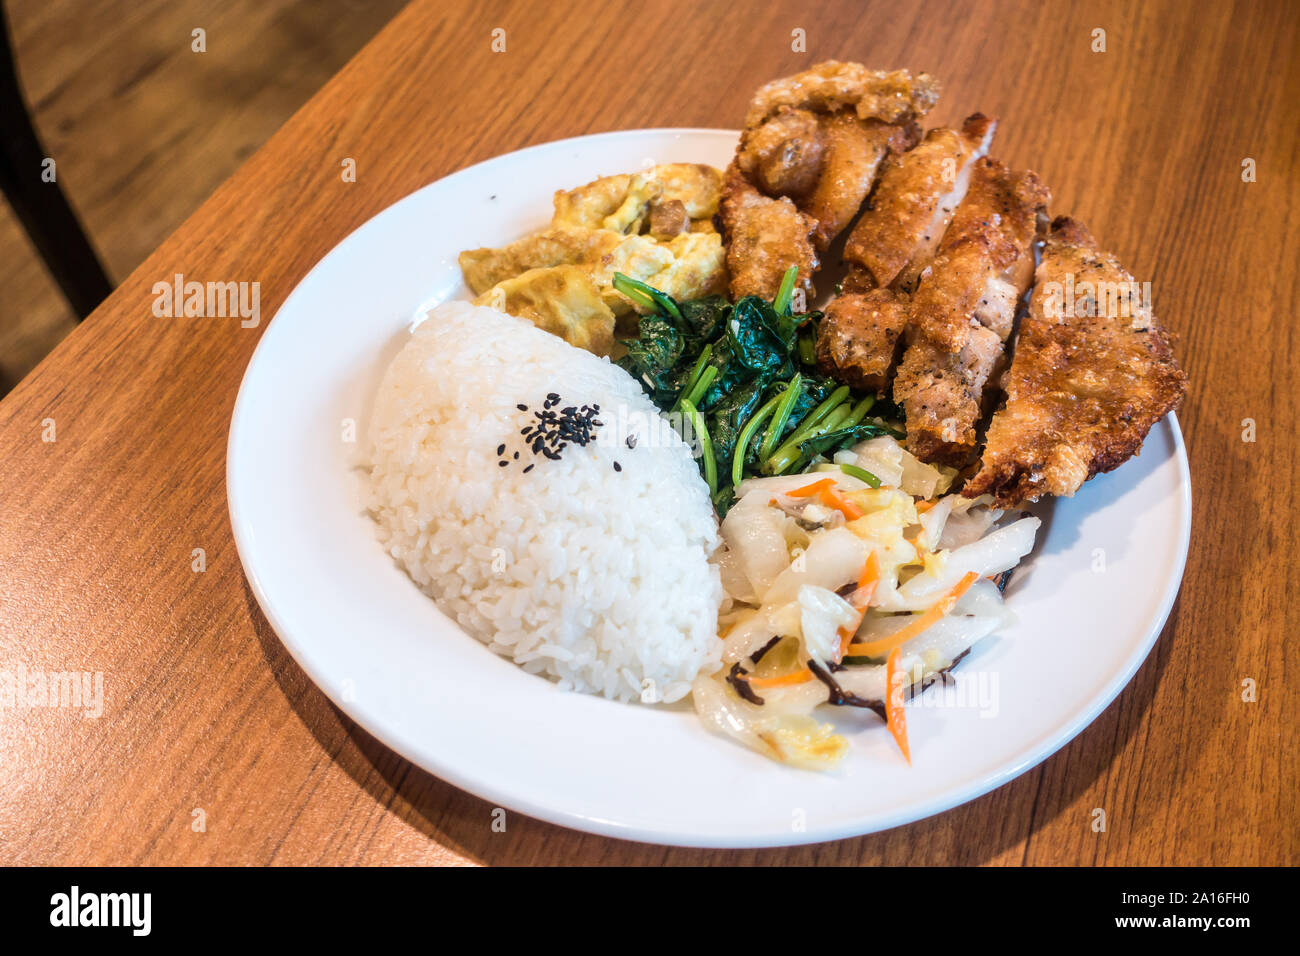 Taiwanese food gourmet fried chicken with rice , bento/boxed meal in wood background Stock Photo